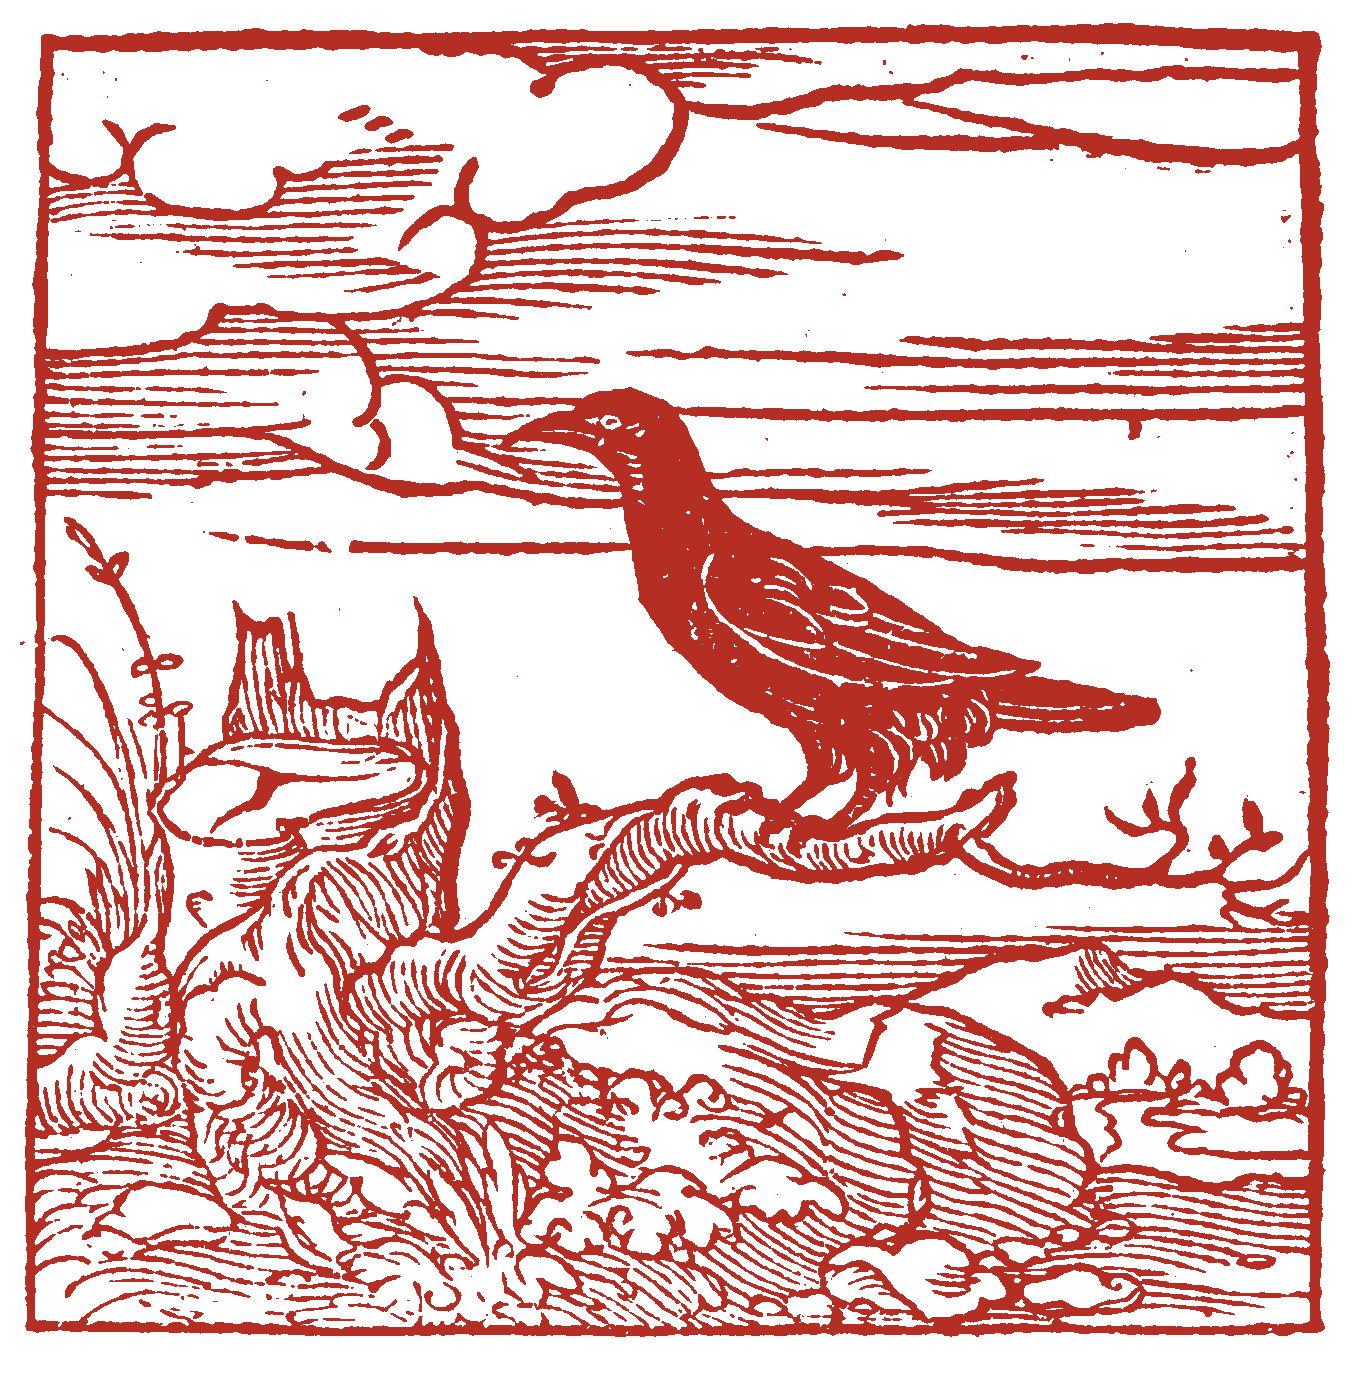 Red woodcut illustration of a crow standing on a branch that is jutting out from a tree stump